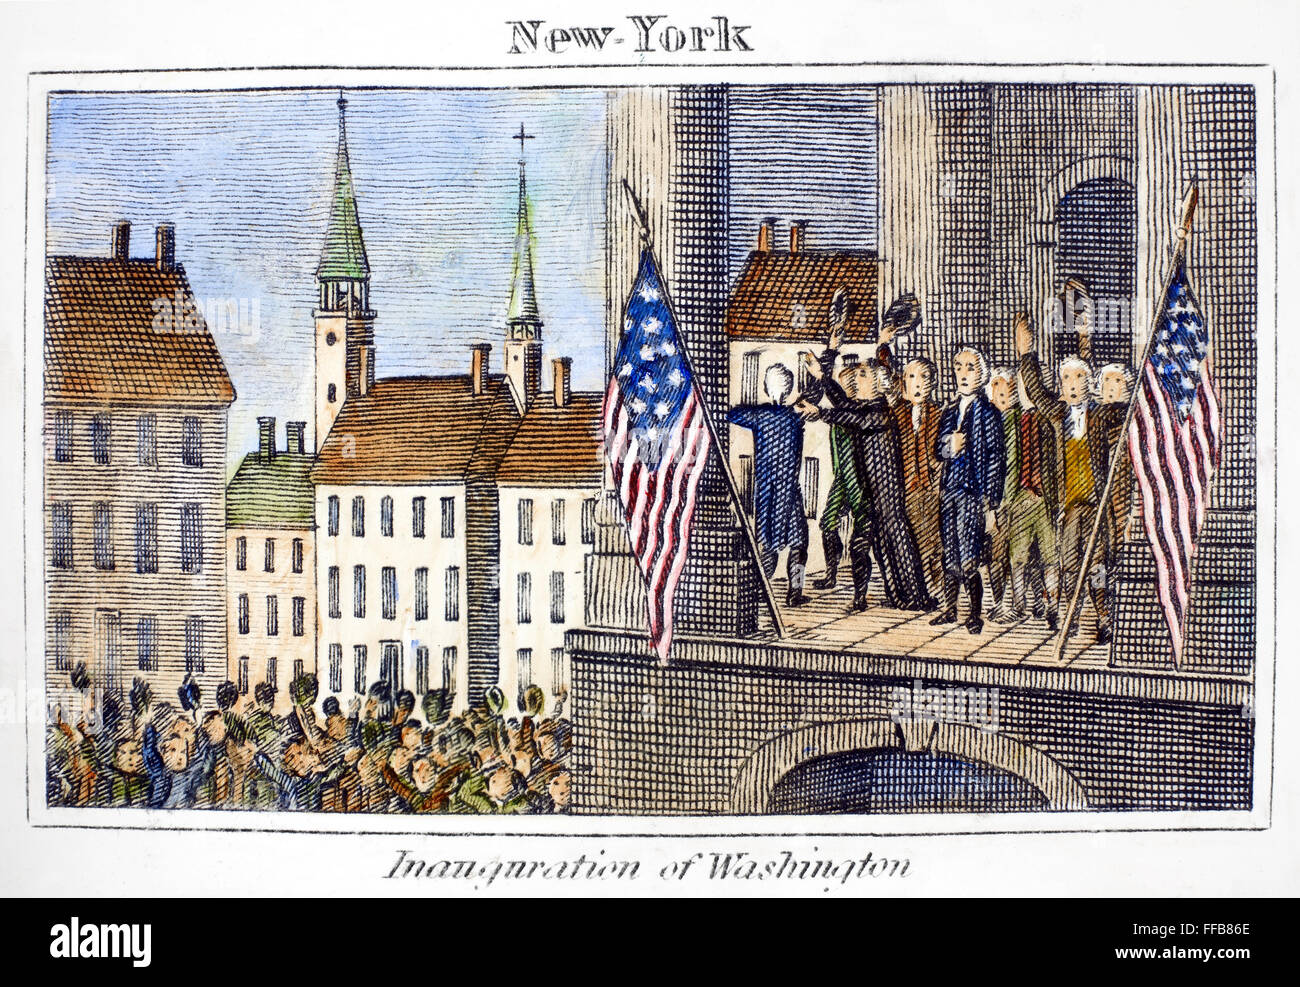 WASHINGTON: INAUGURATION. /nThe inauguration of George Washington as the first President of the United States at Federal Hall, New York, 30 April 1789. Copper engraving, American, 1829. Stock Photo